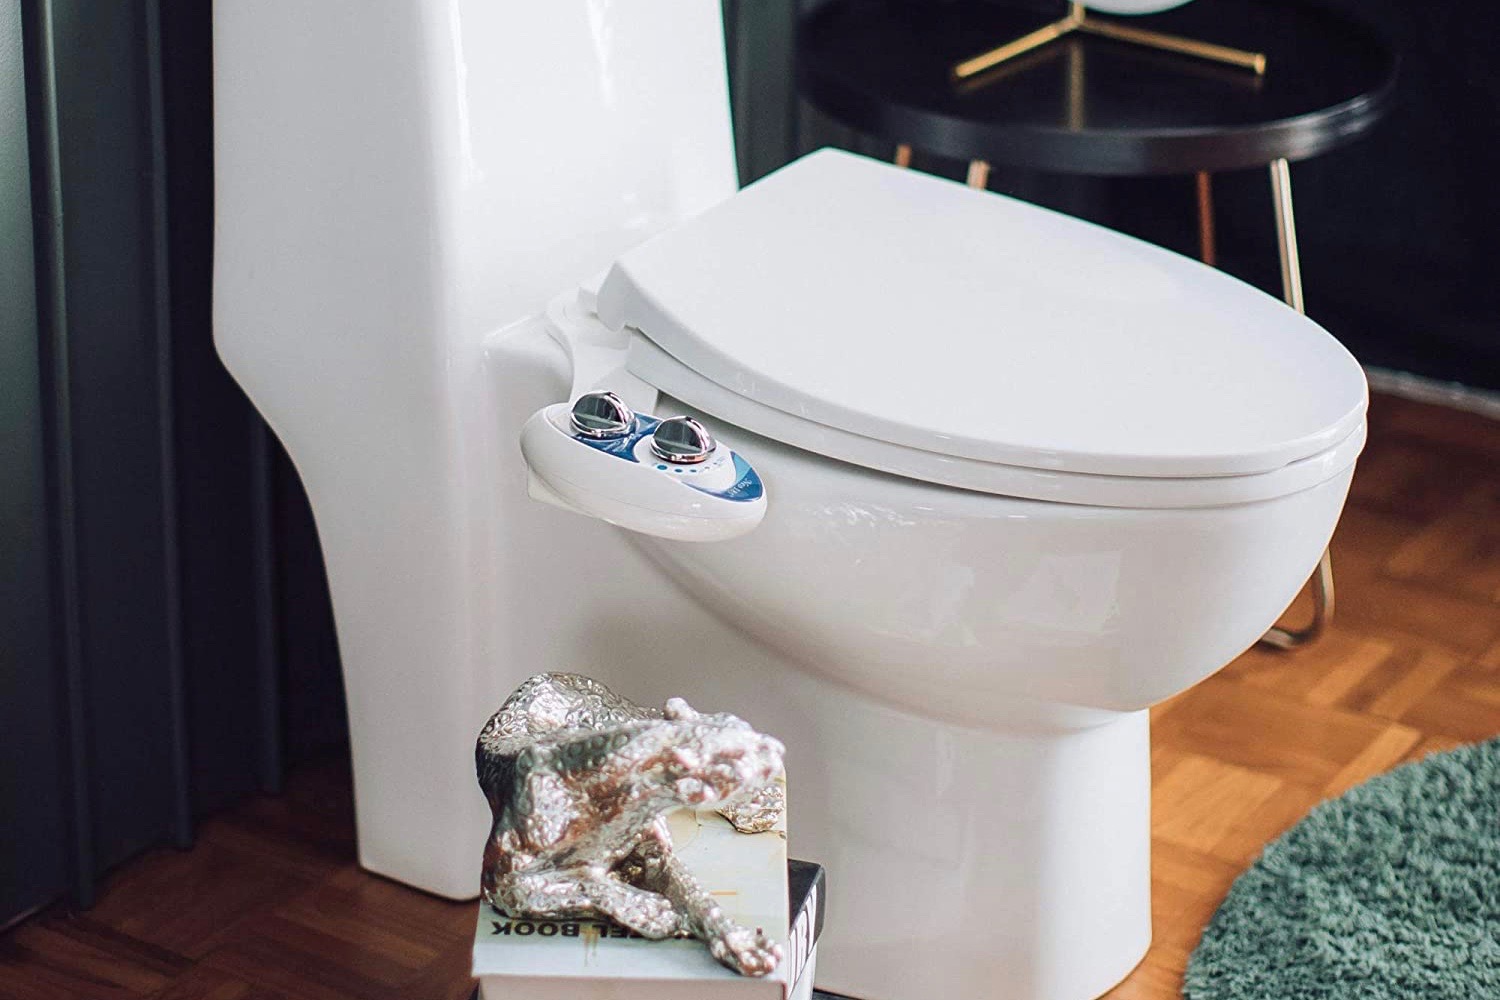 What Is A Bidet? Uses, Types, Cost & More